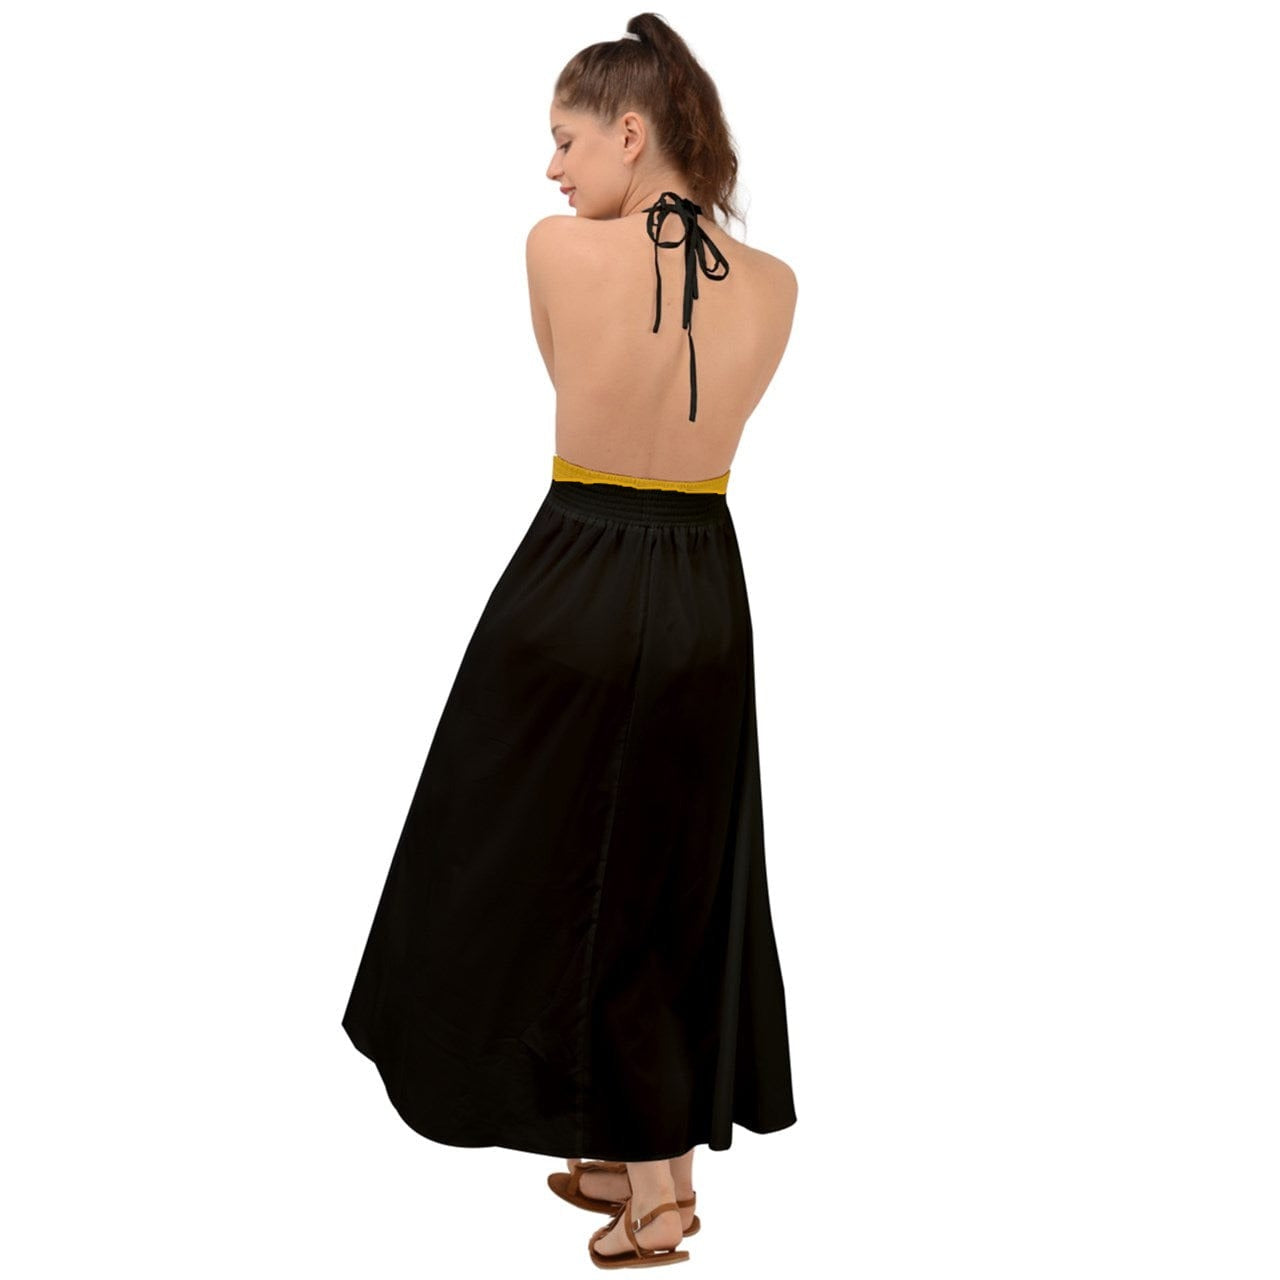 The wheaten store Wheaten Puppy Backless Maxi Party Dress Black & Gold